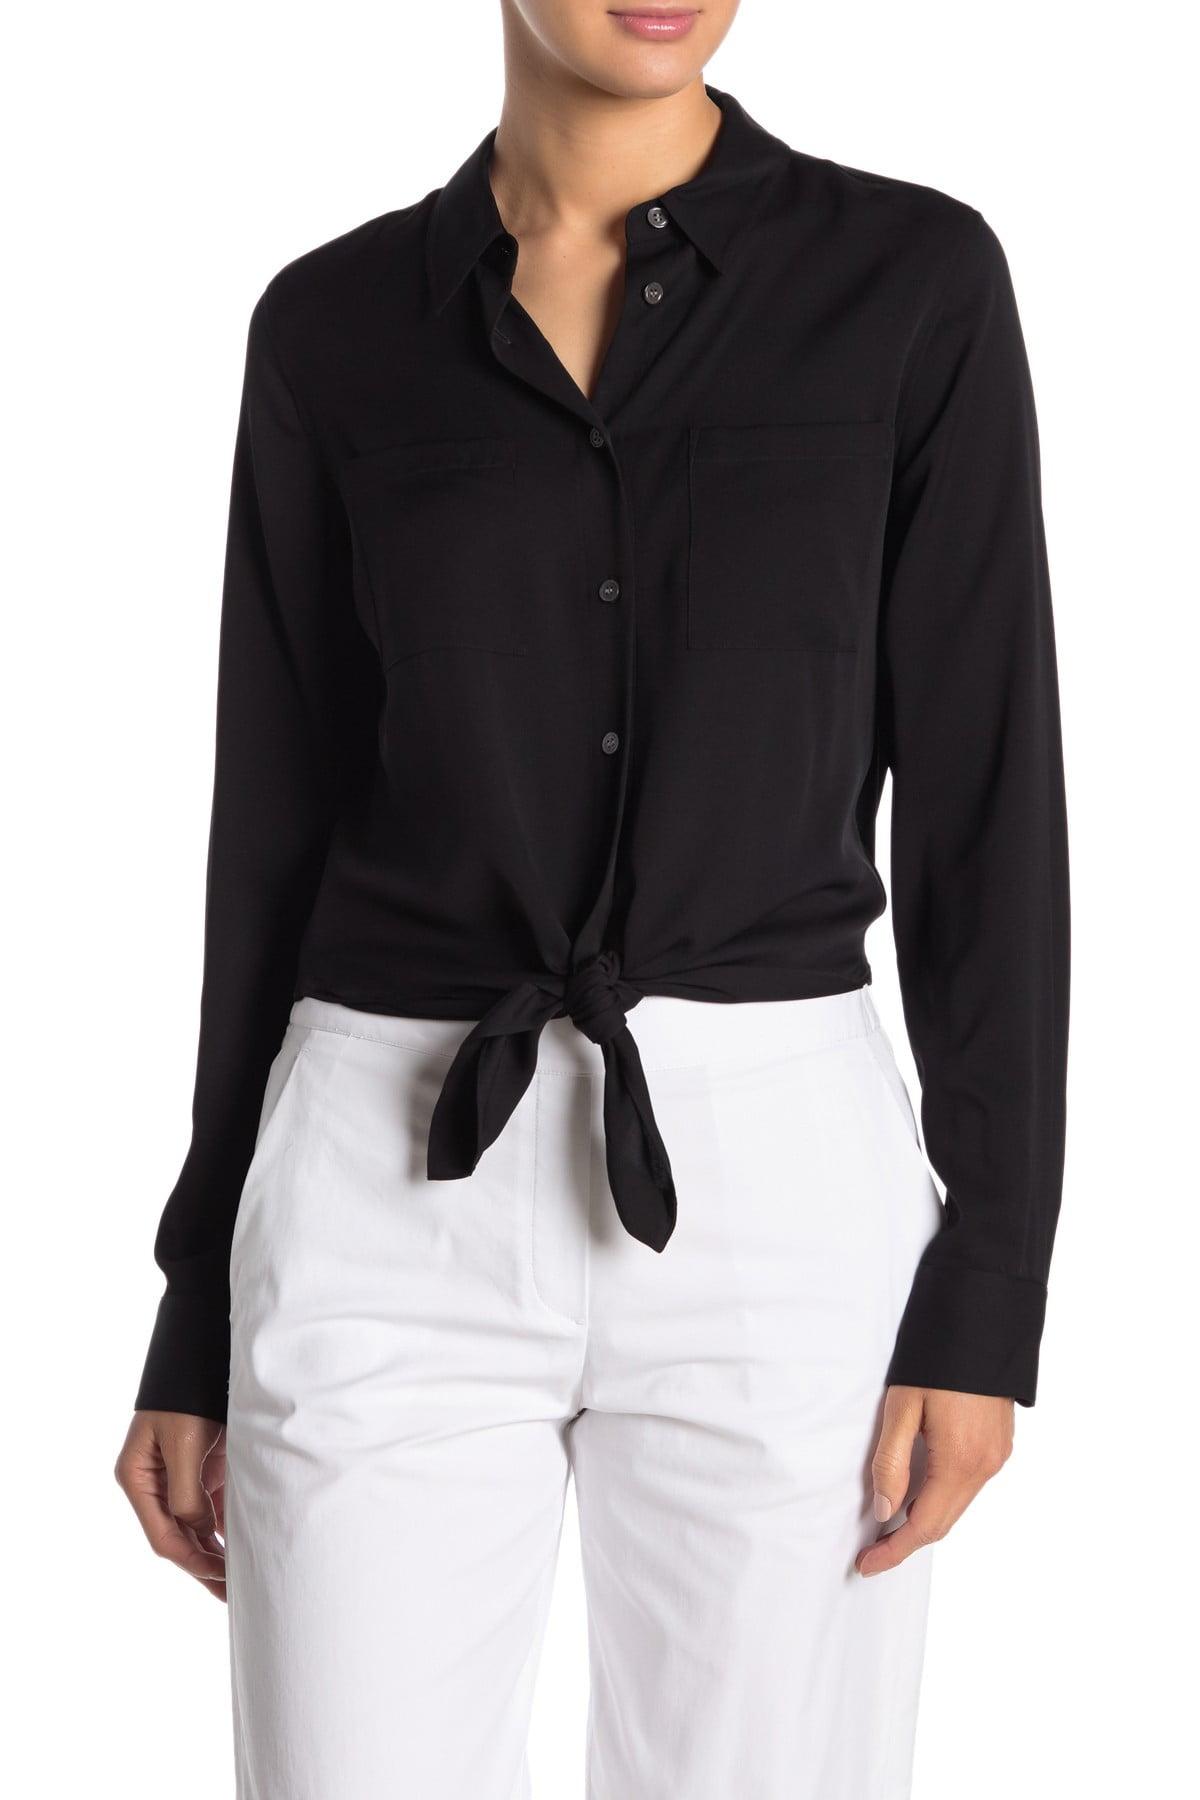 Theory Tie Front Silk Blend Blouse in Black | Lyst